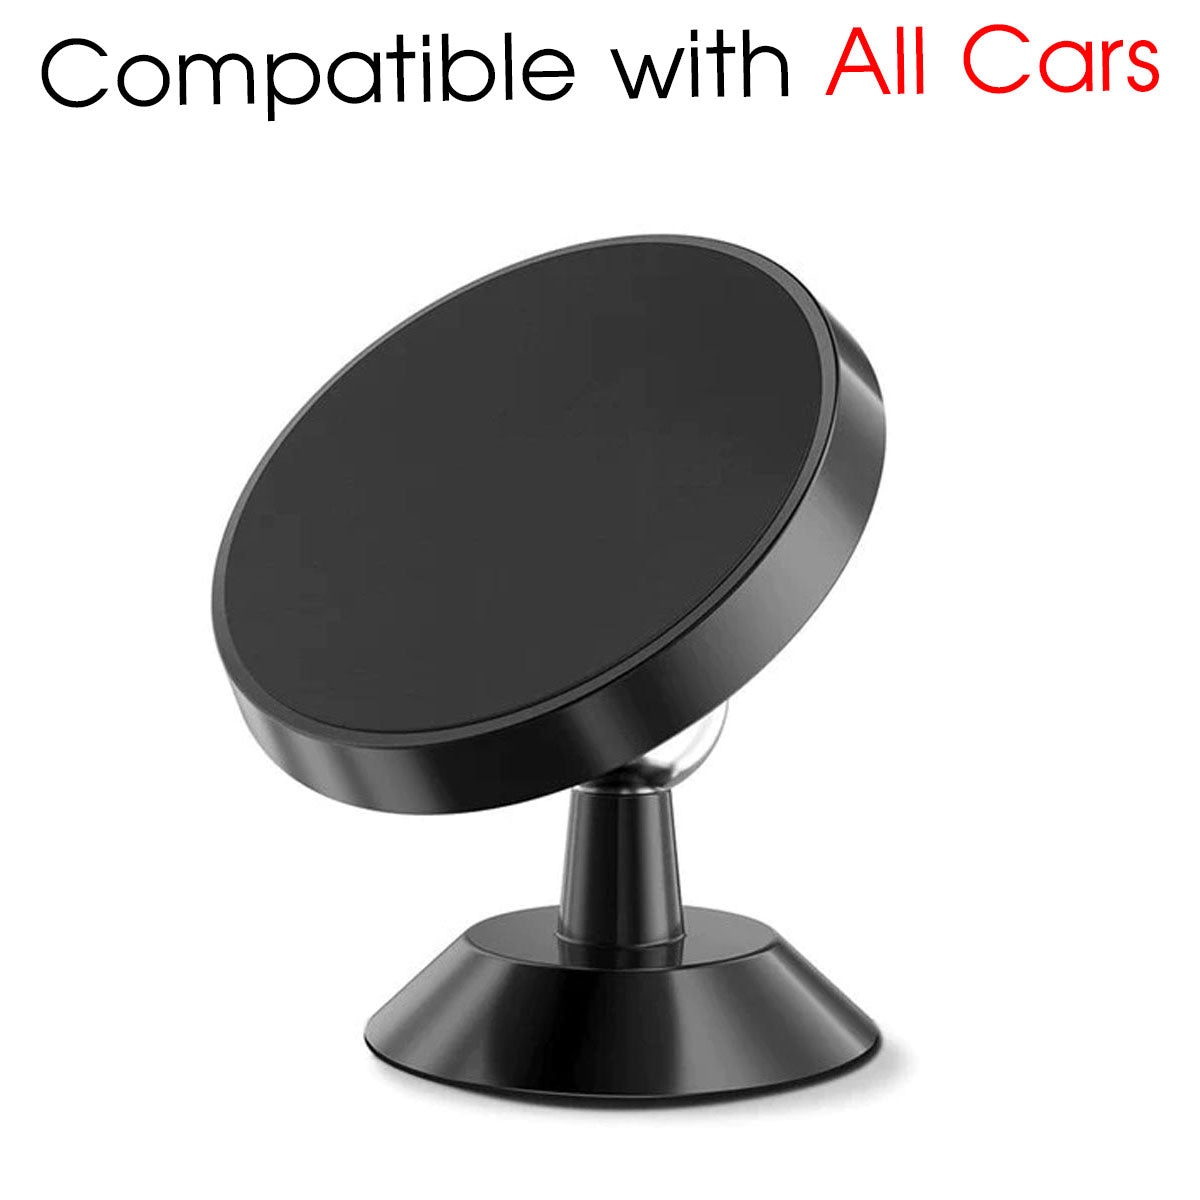 [2 Pack ] Magnetic Phone Mount, Custom For Cars, [ Super Strong Magnet ] [ with 4 Metal Plate ] car Magnetic Phone Holder, [ 360° Rotation ] Universal Dashboard car Mount Fits All Cell Phones, Car Accessories CC13982 - Delicate Leather